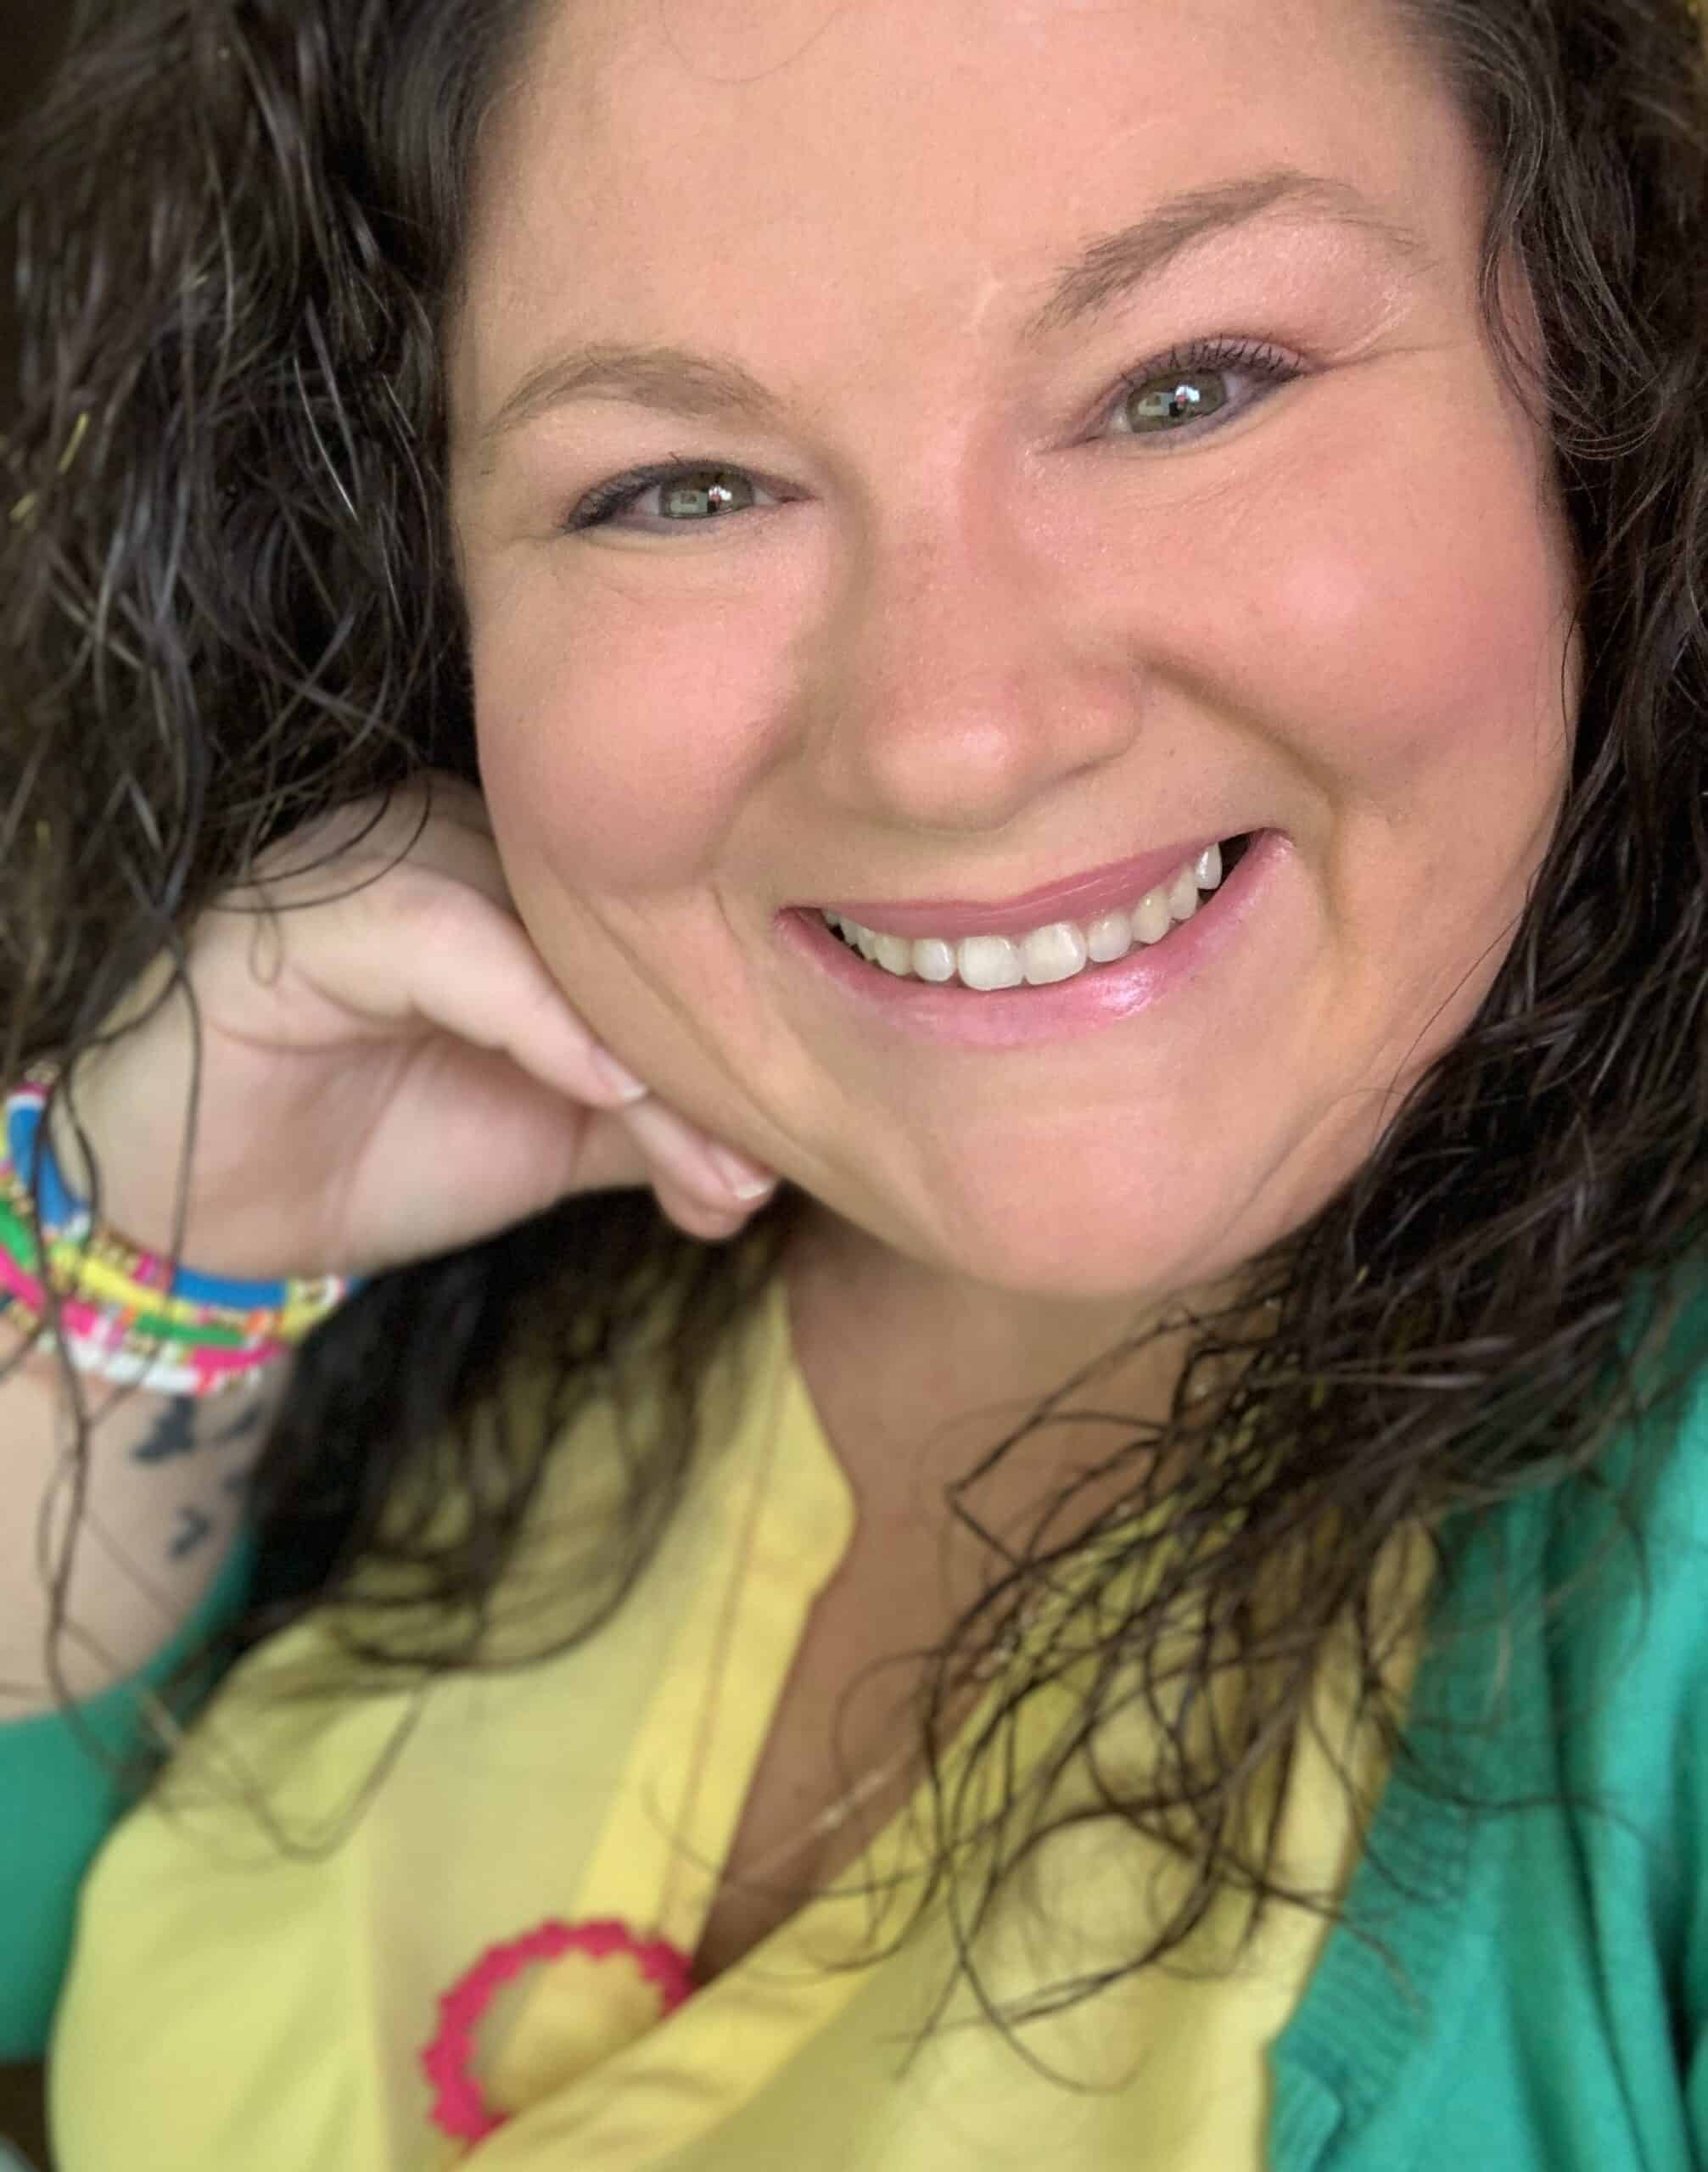 A smiling woman with curly hair and a green shirt.